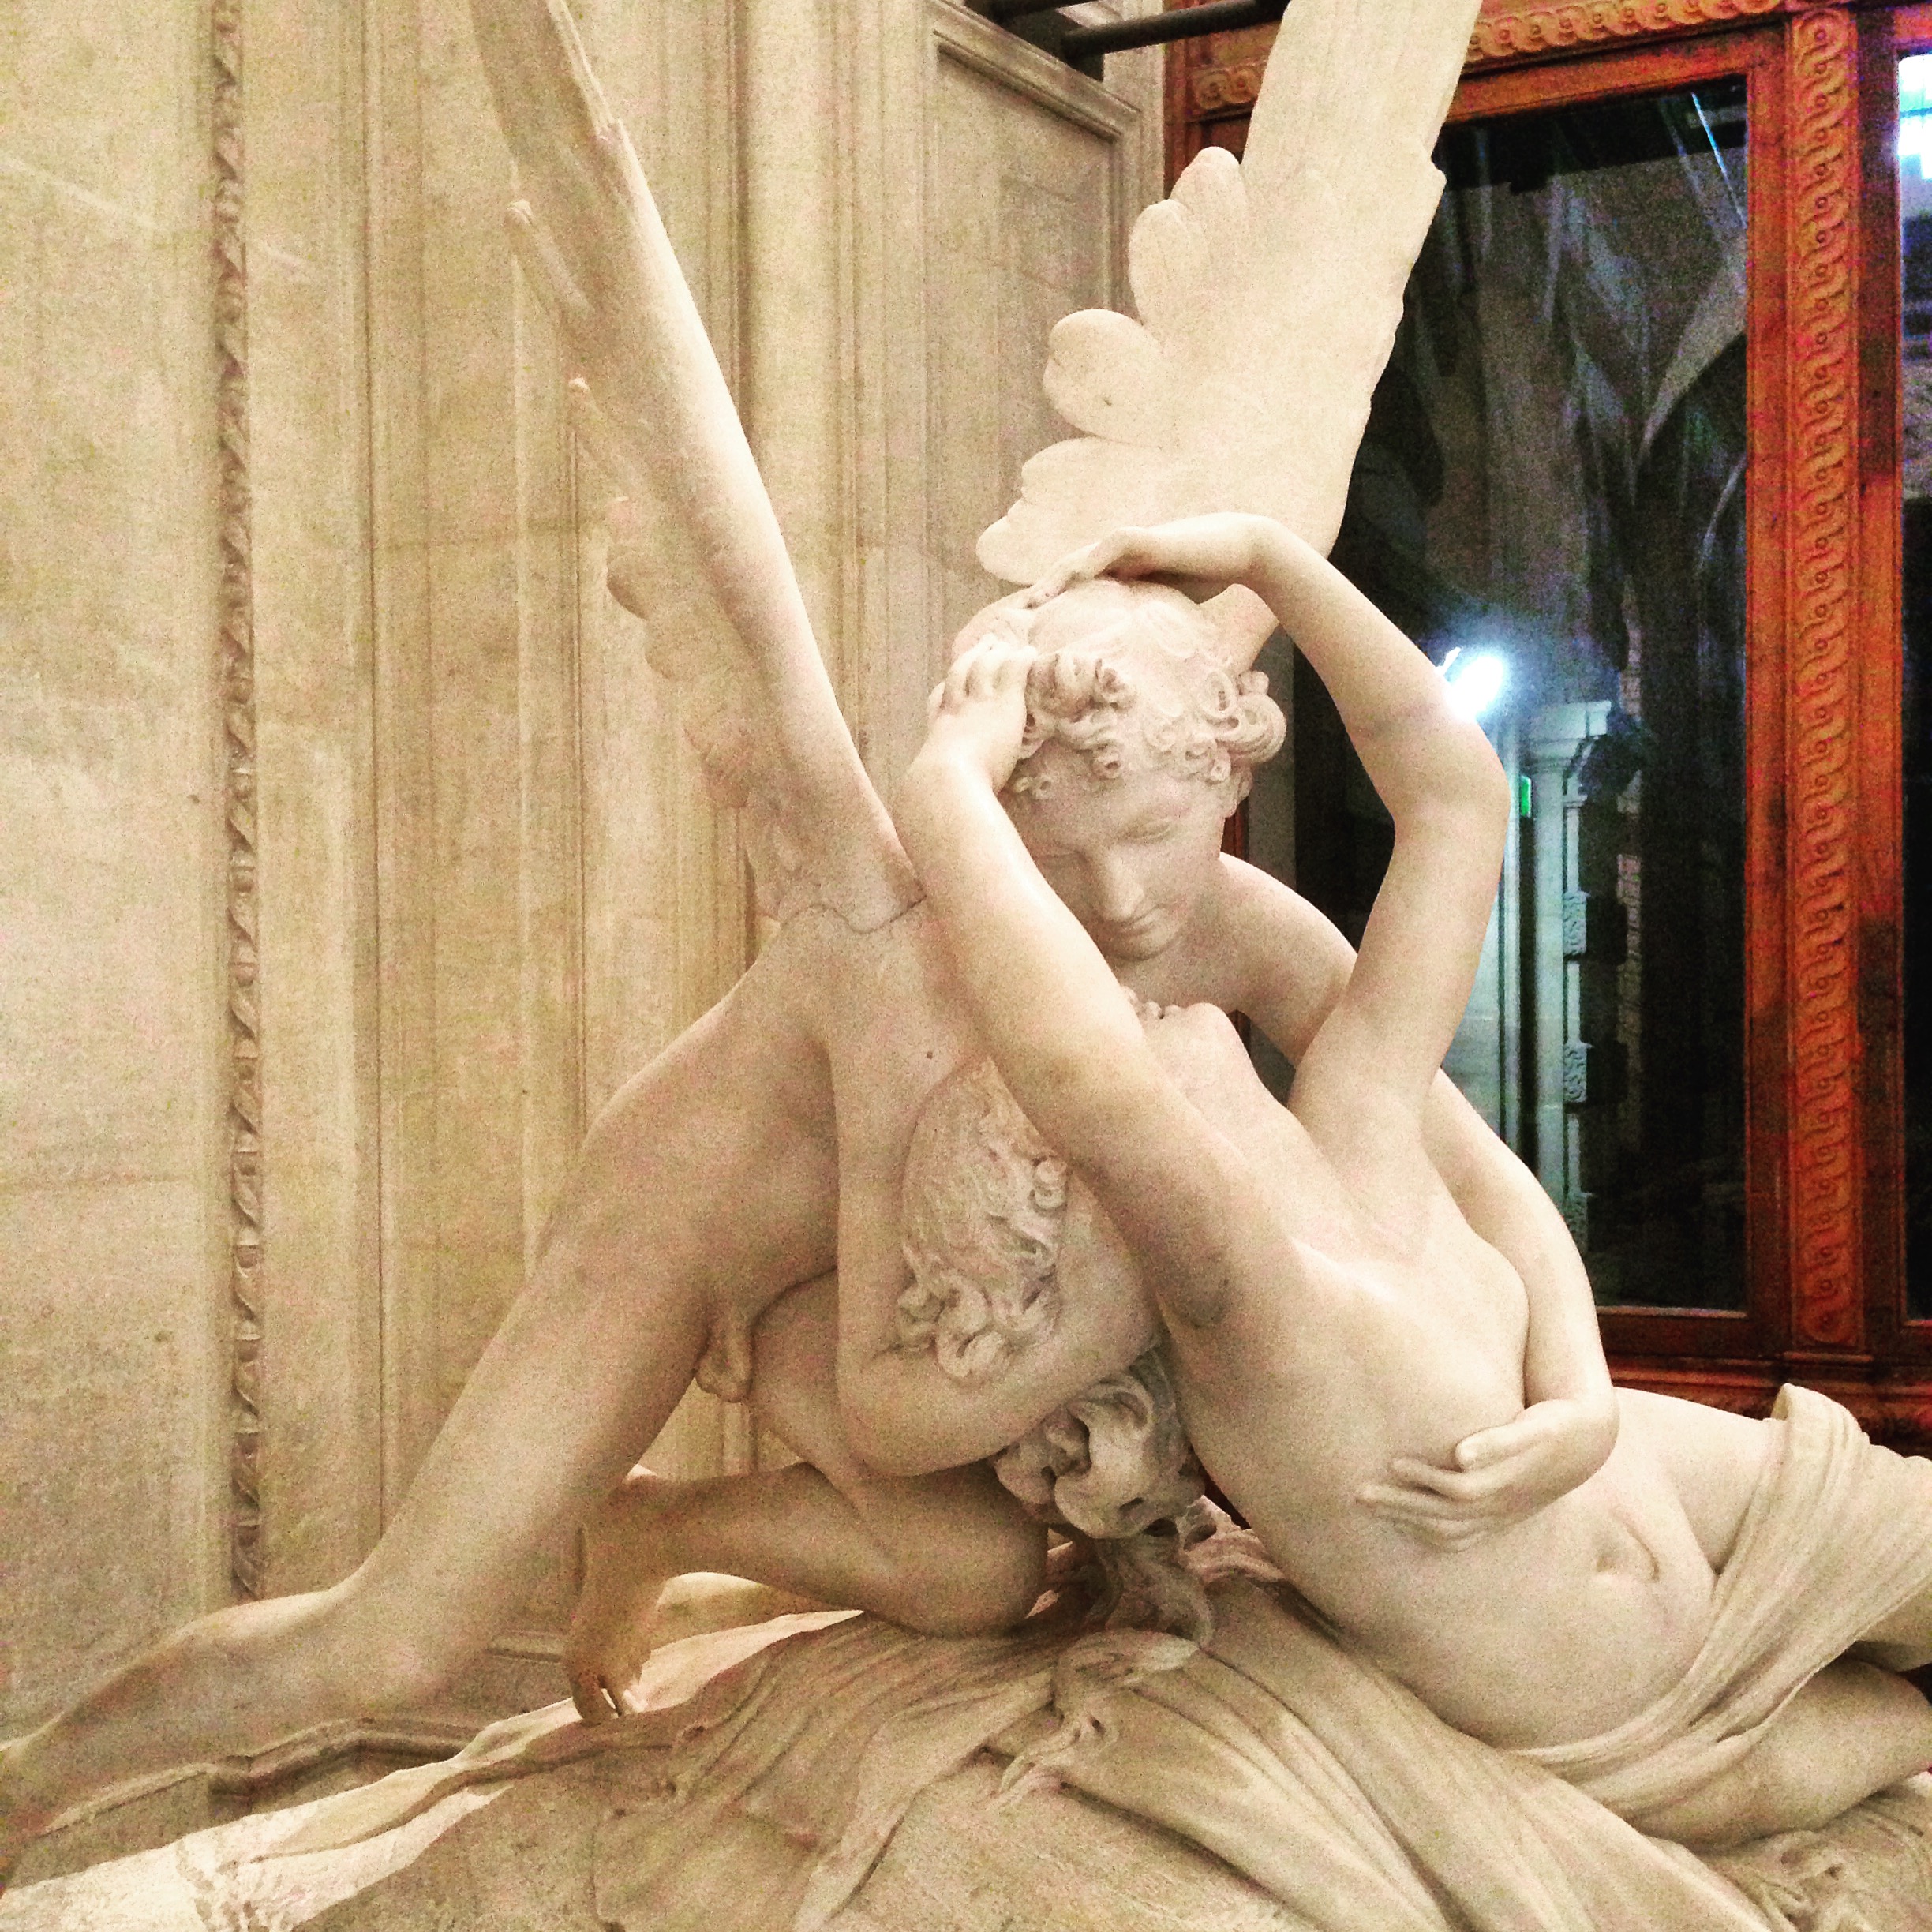 Amor and Psyche by Antonio Canova, displayed at the Louvre. I can't even pretend to be tough when I see this one. Melts my heart.